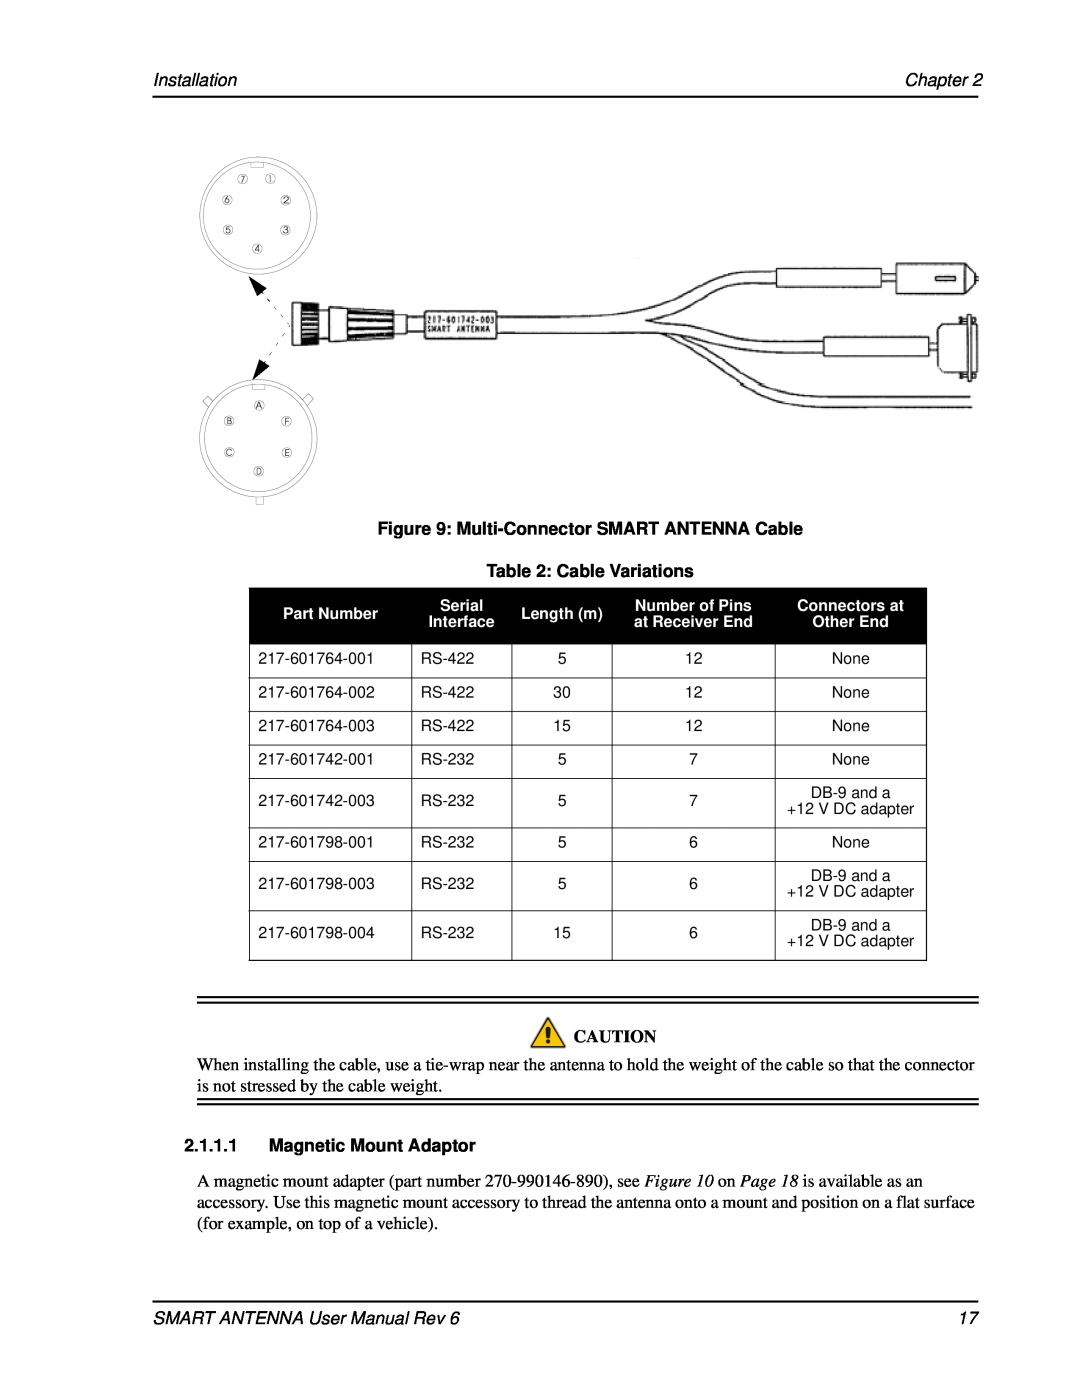 Novatel Installation, Chapter, Multi-ConnectorSMART ANTENNA Cable, Cable Variations, 2.1.1.1Magnetic Mount Adaptor 